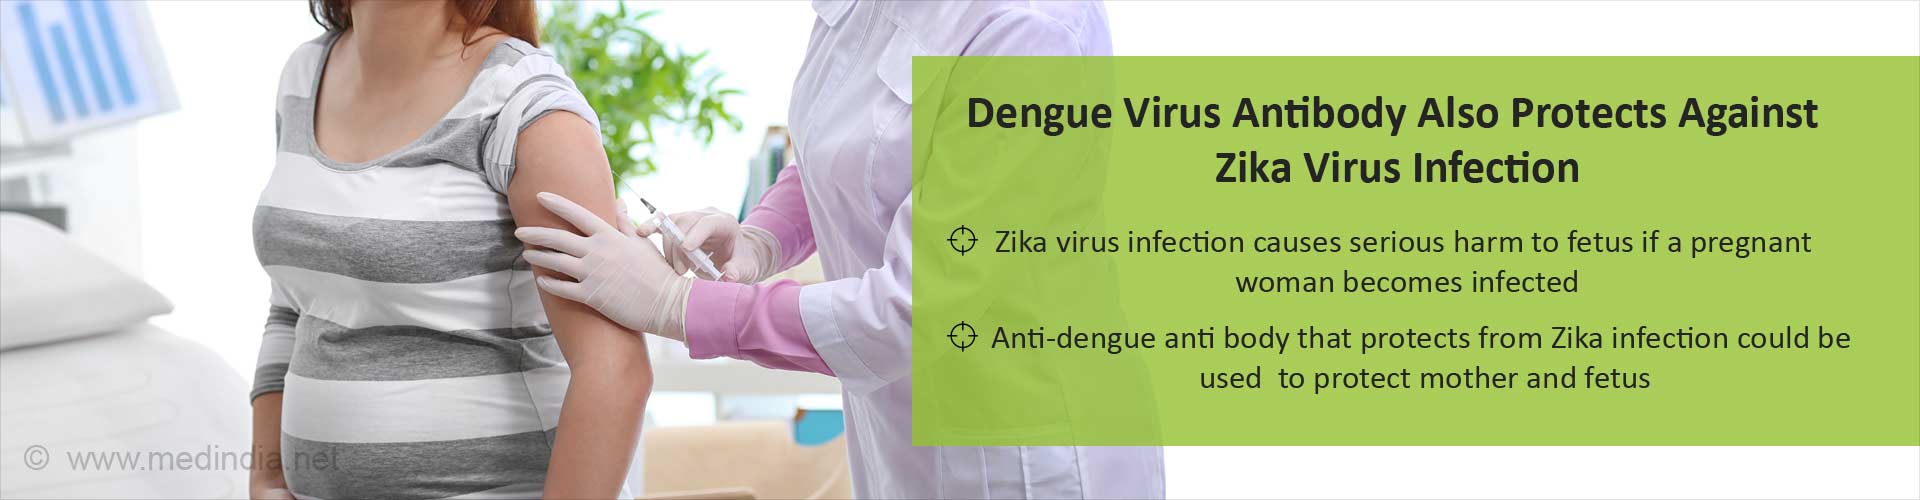 Dengue virus antibody also protects against Zika virus infection
- Zika virus infections causes serious harm to fetus if a pregnant woman becomes infected
- Anti-dengue anti-body that protects from Zika infection could be used to protect mother and fetus